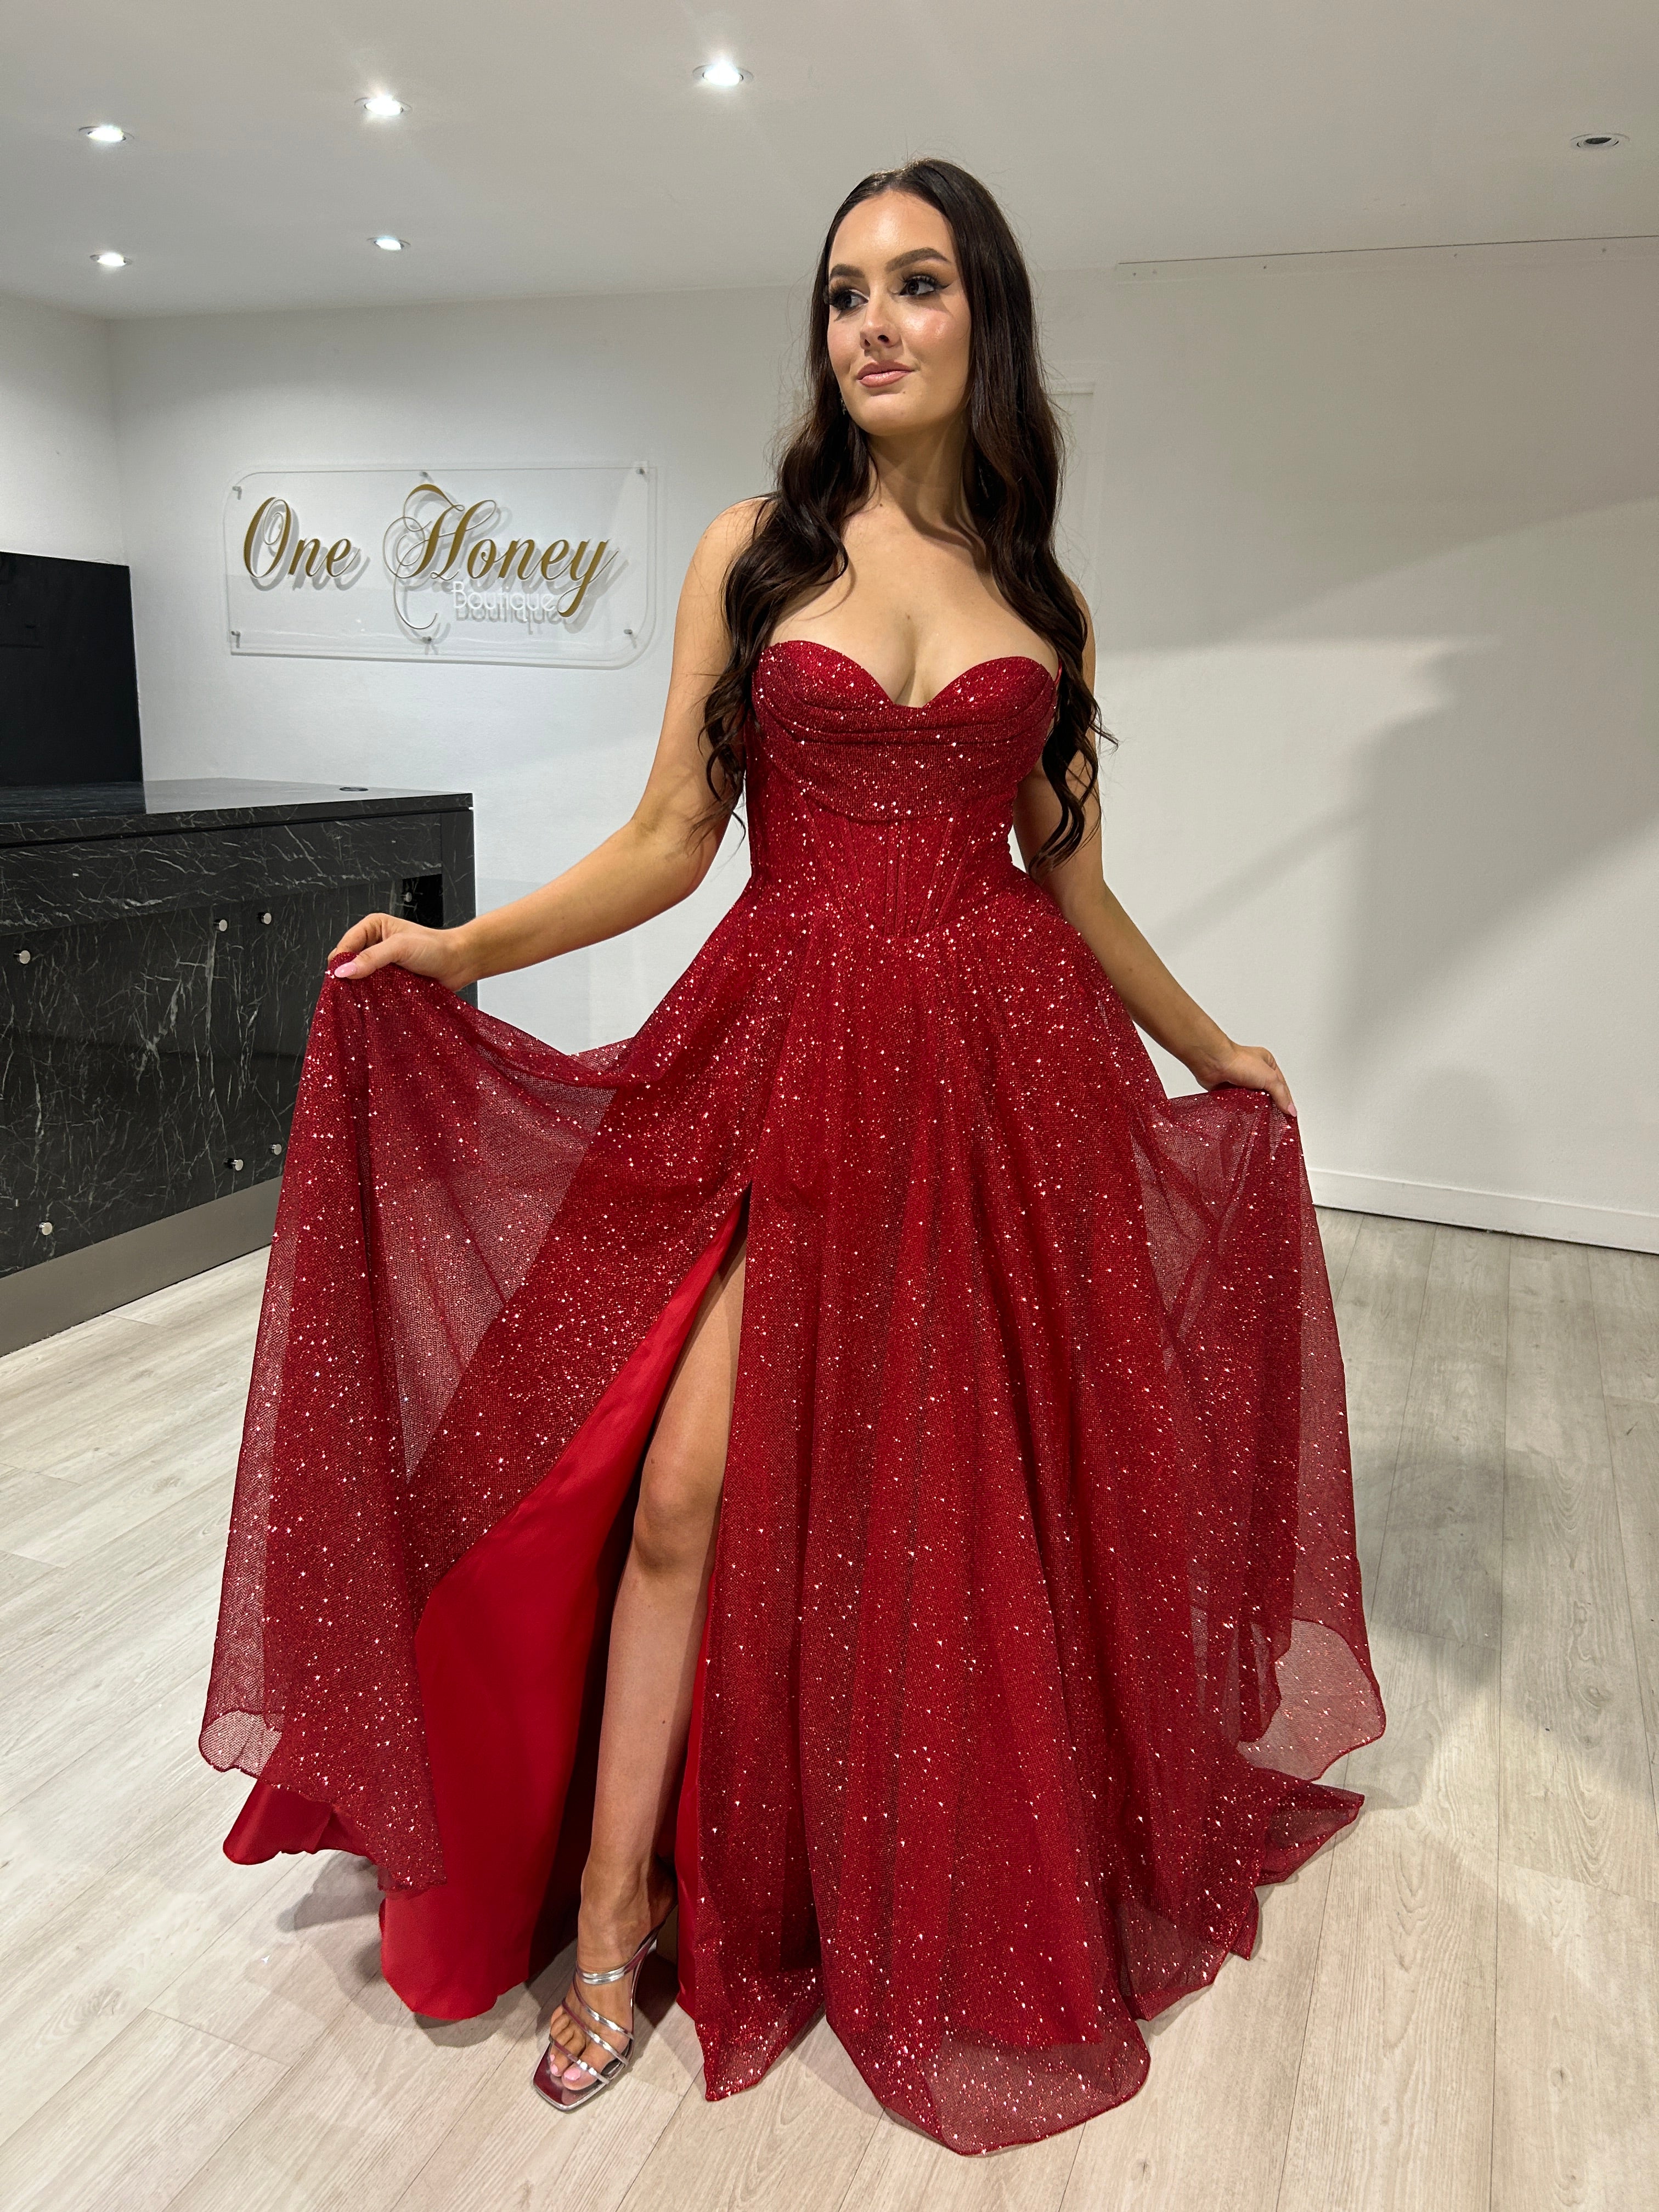 RCR EXCLUSIVES Dresses - Red Carpet Ready